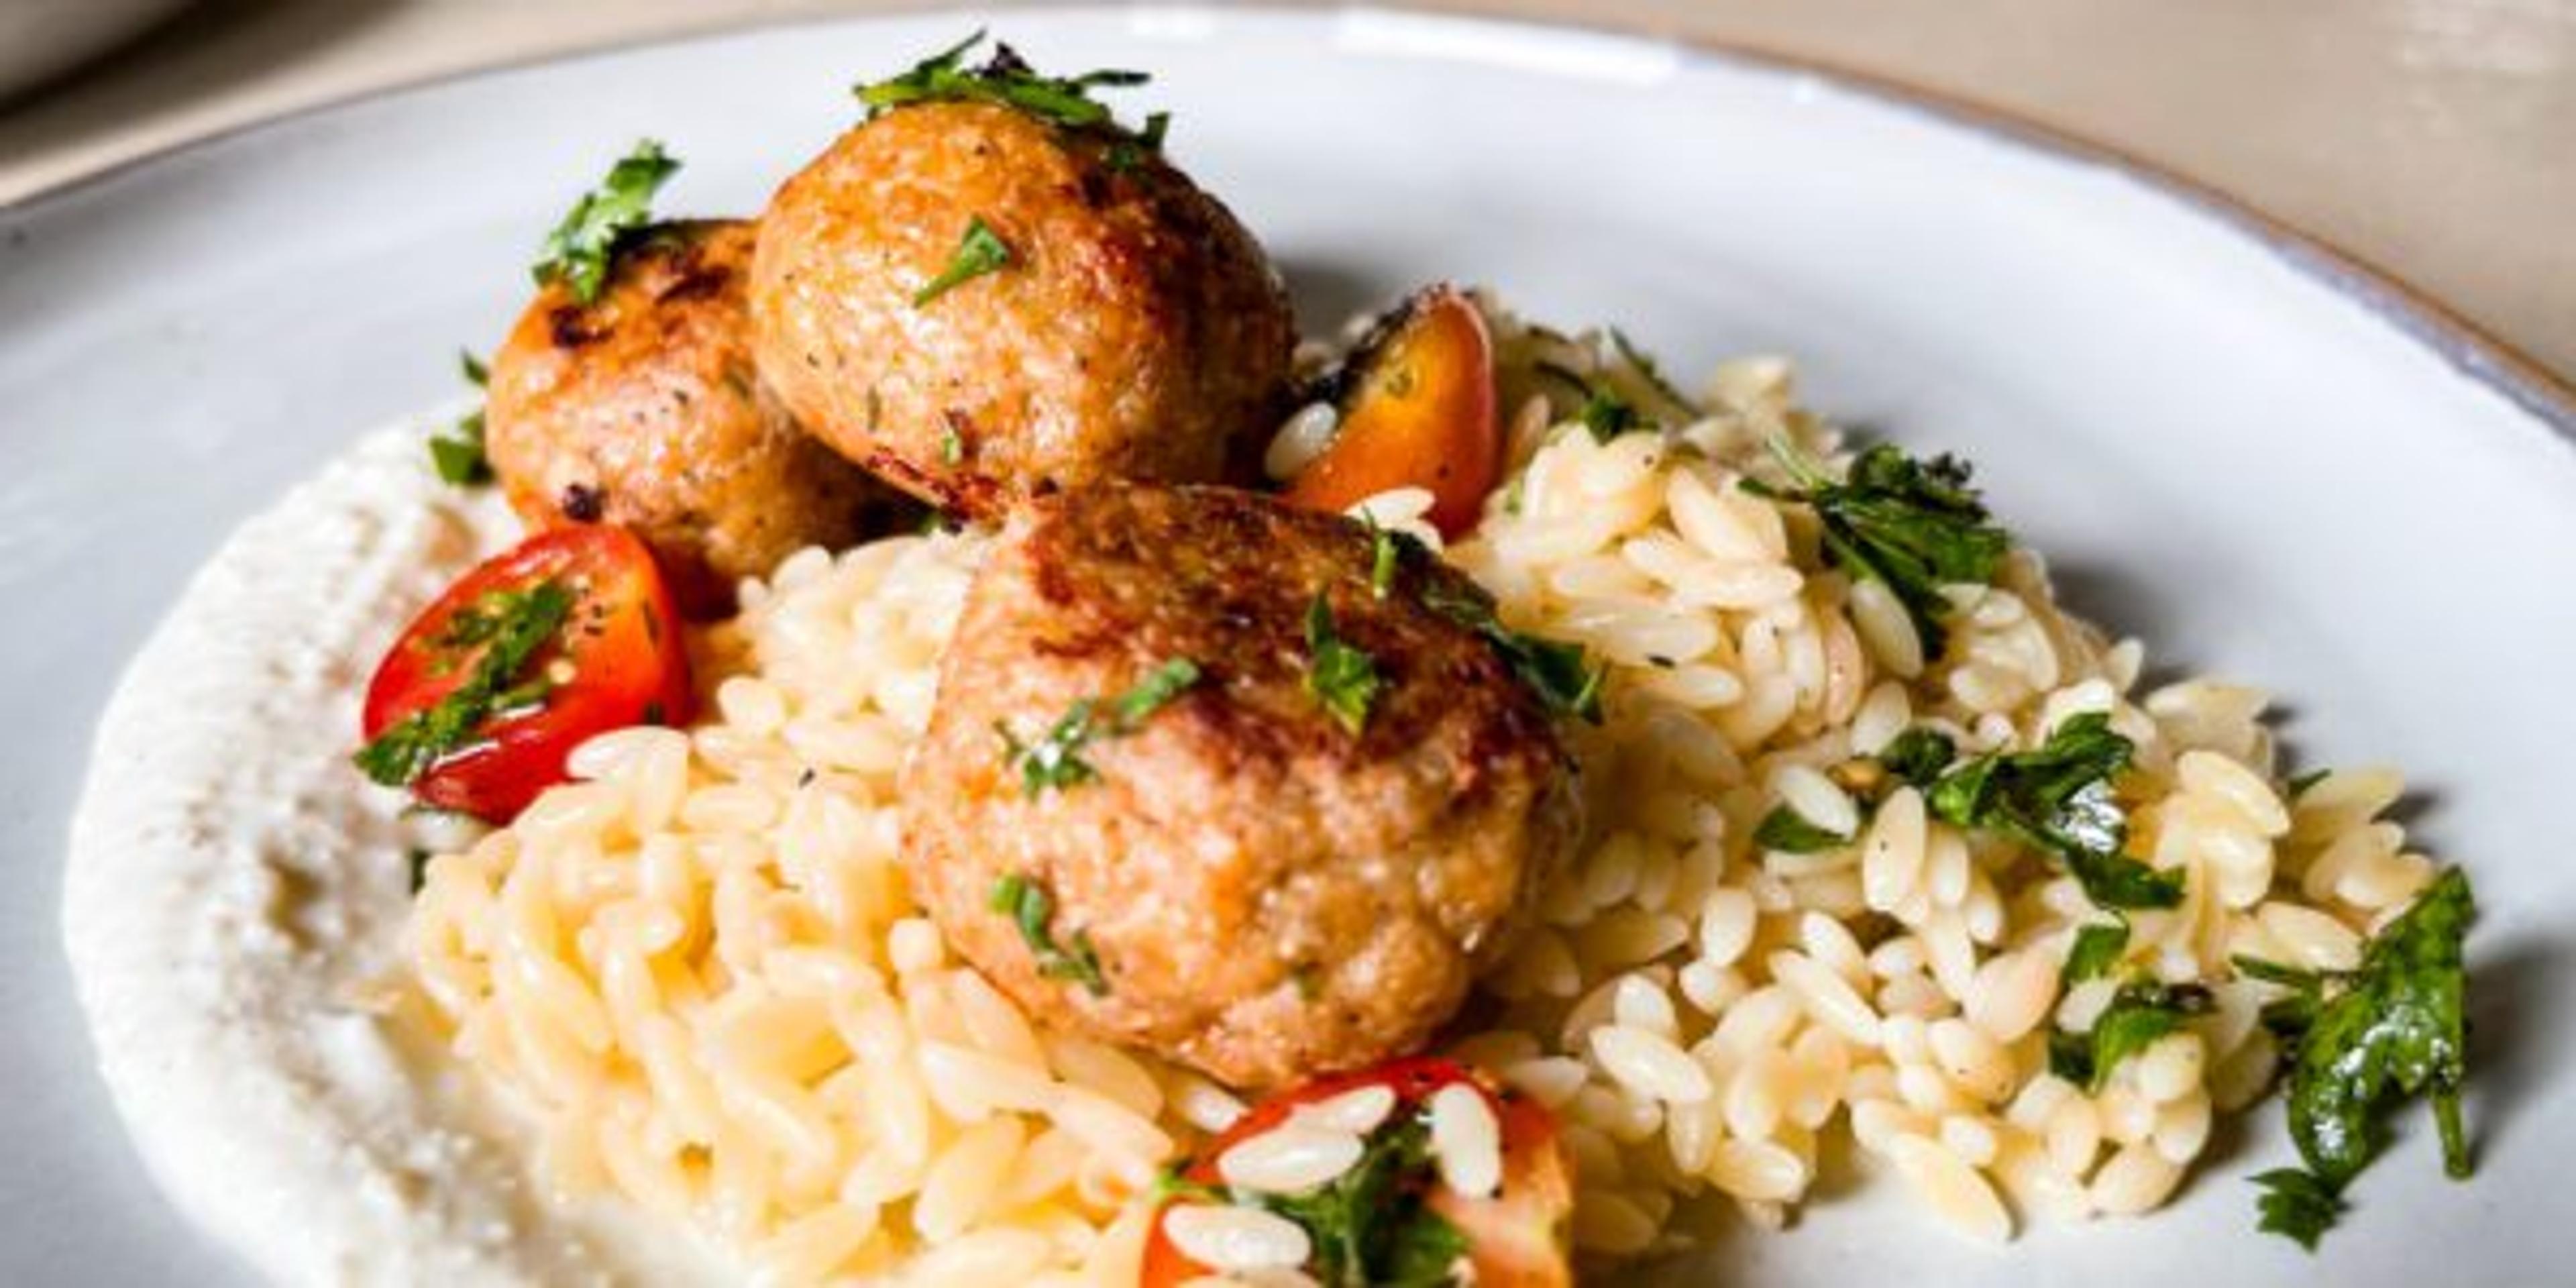 Meatballs with orzo and whipped feta